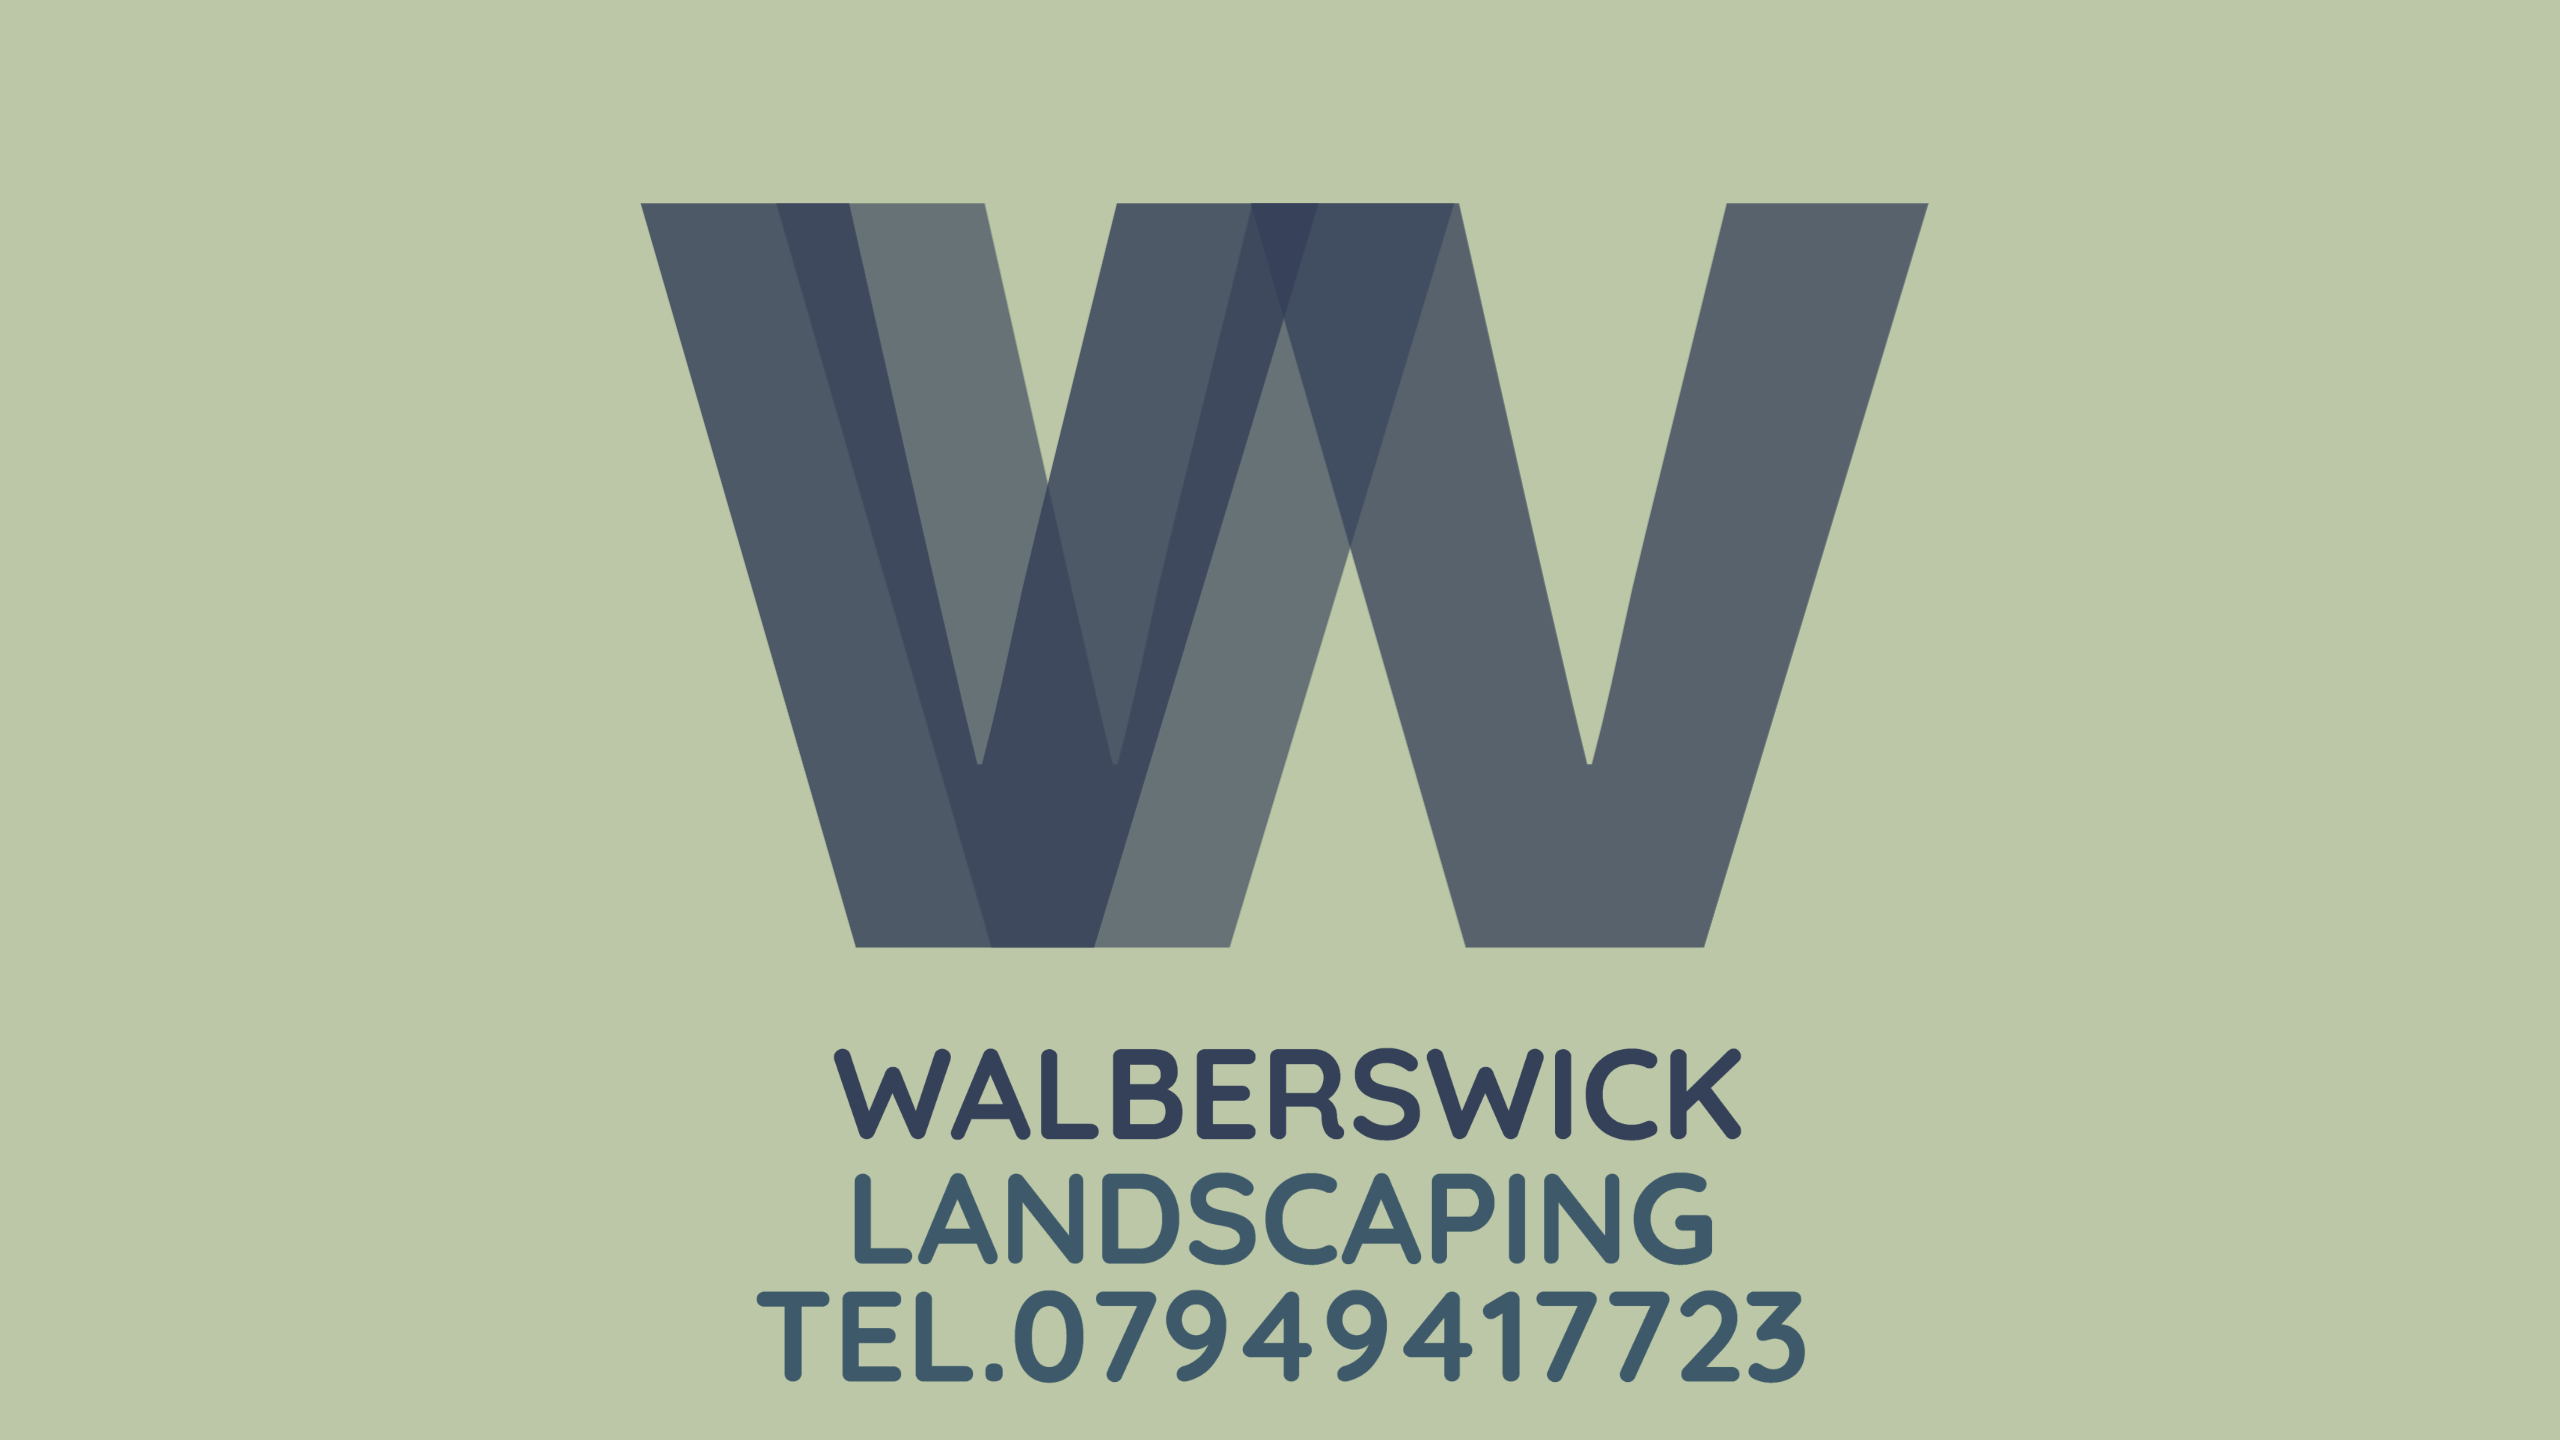 Walberswick Landscaping and Fencing